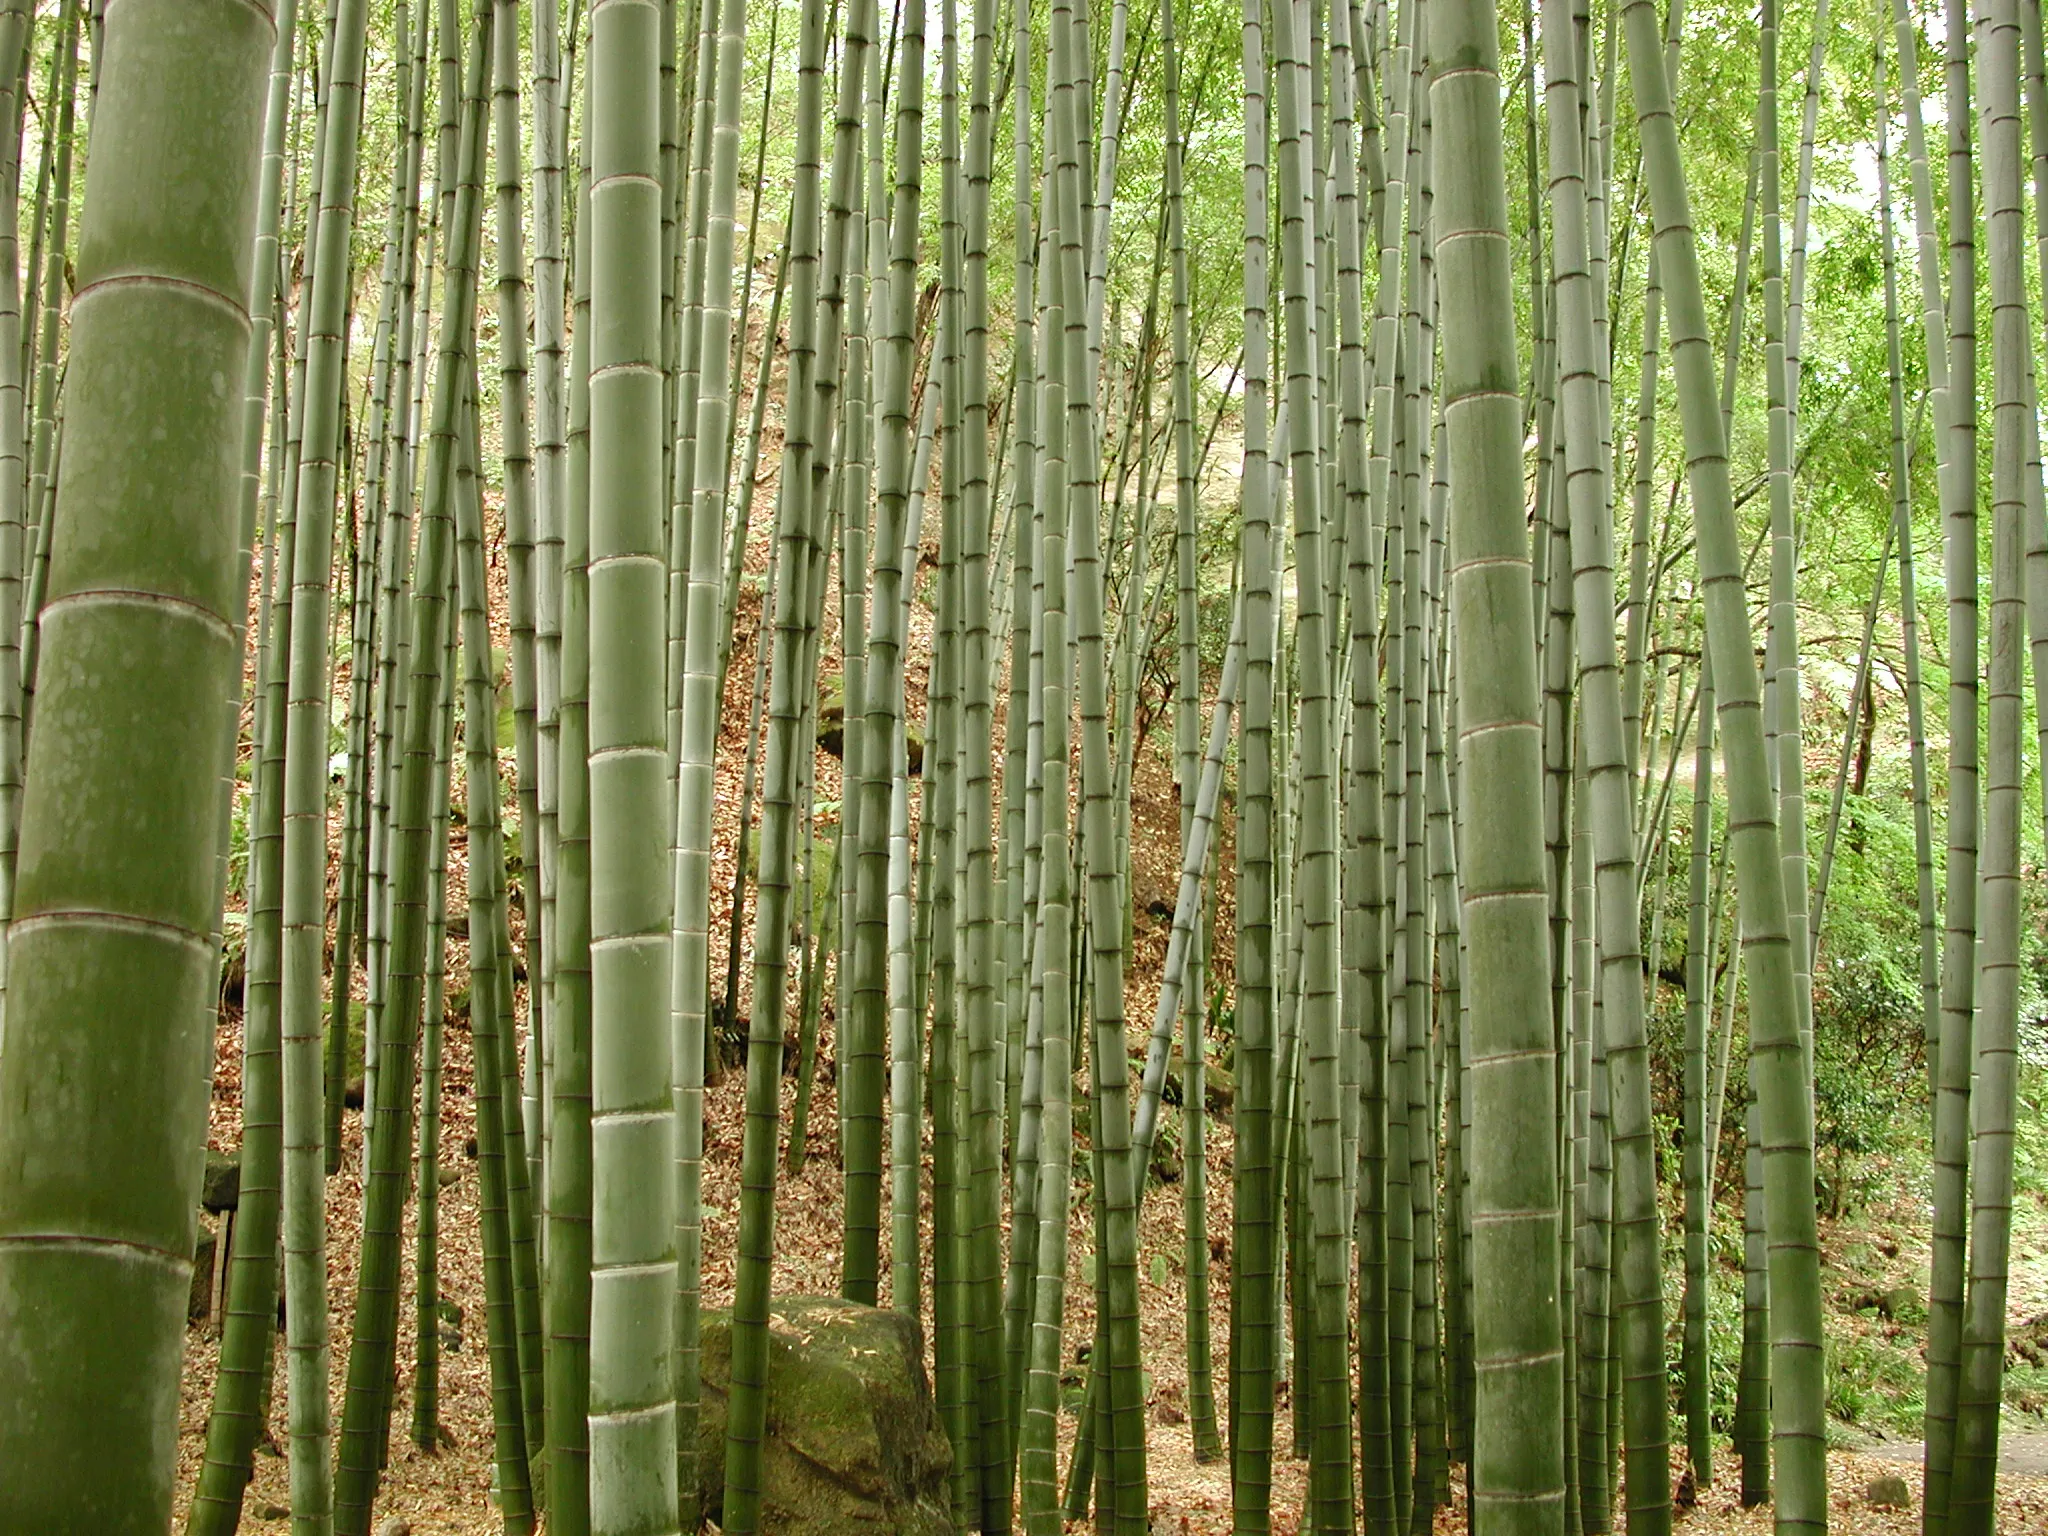 A dense bamboo forest